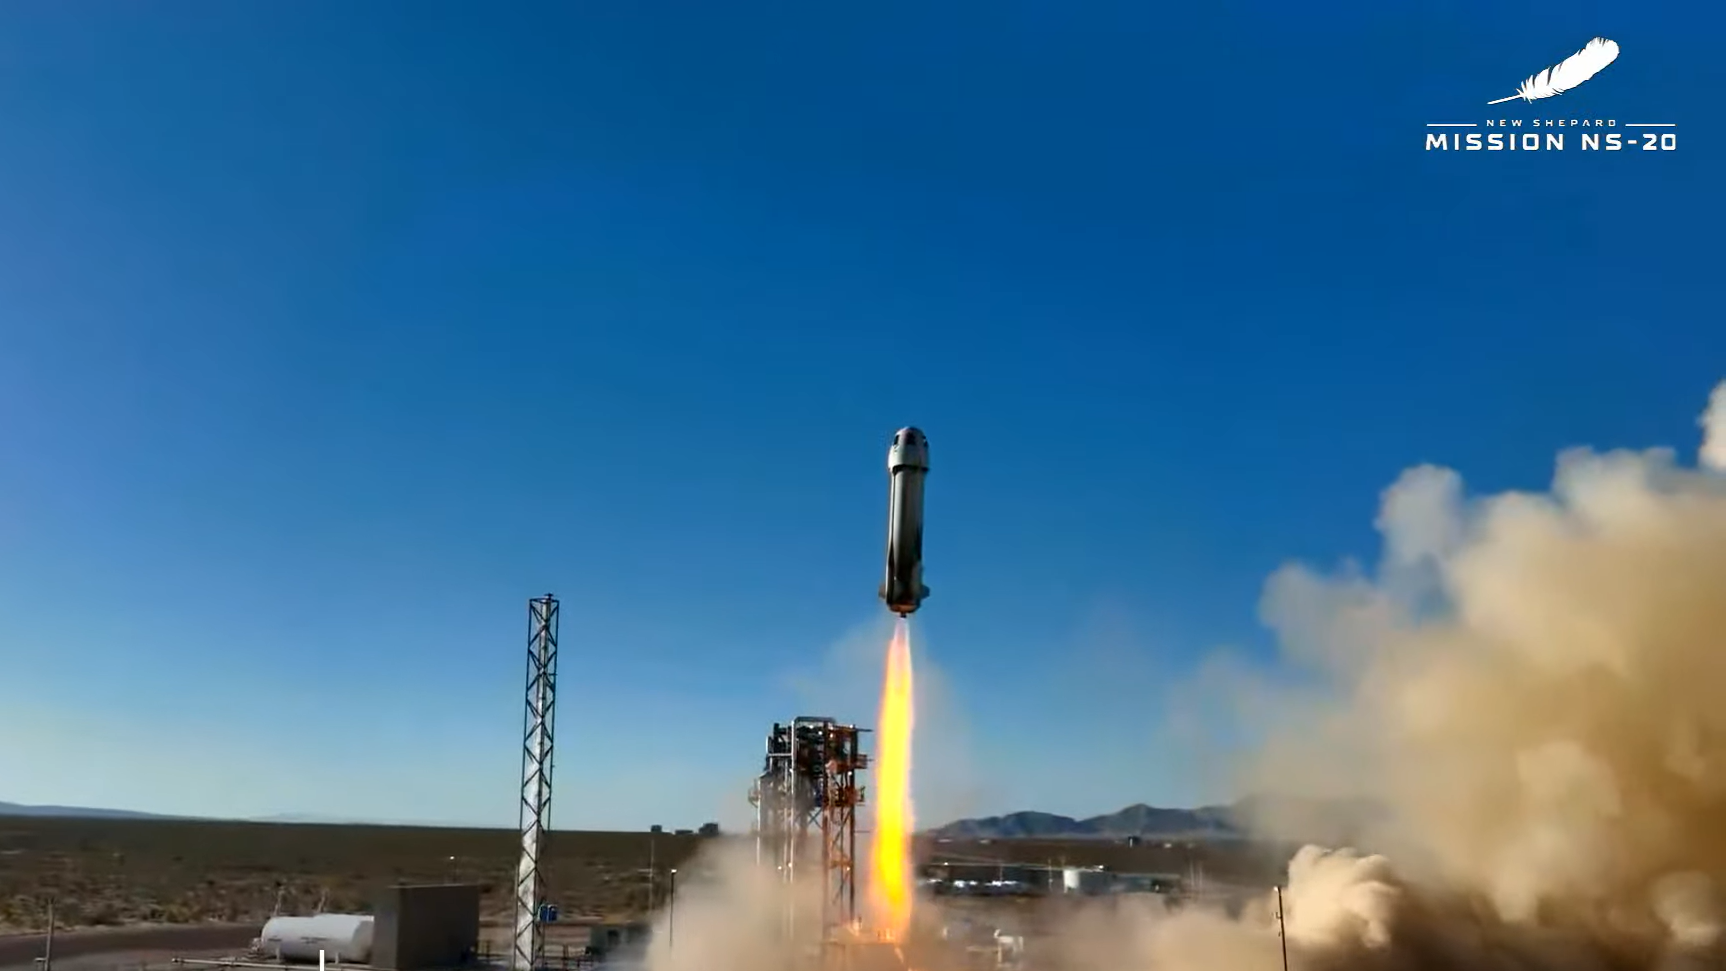 Liftoff for Blue Origin's NS-20 mission on March 31, 2022.